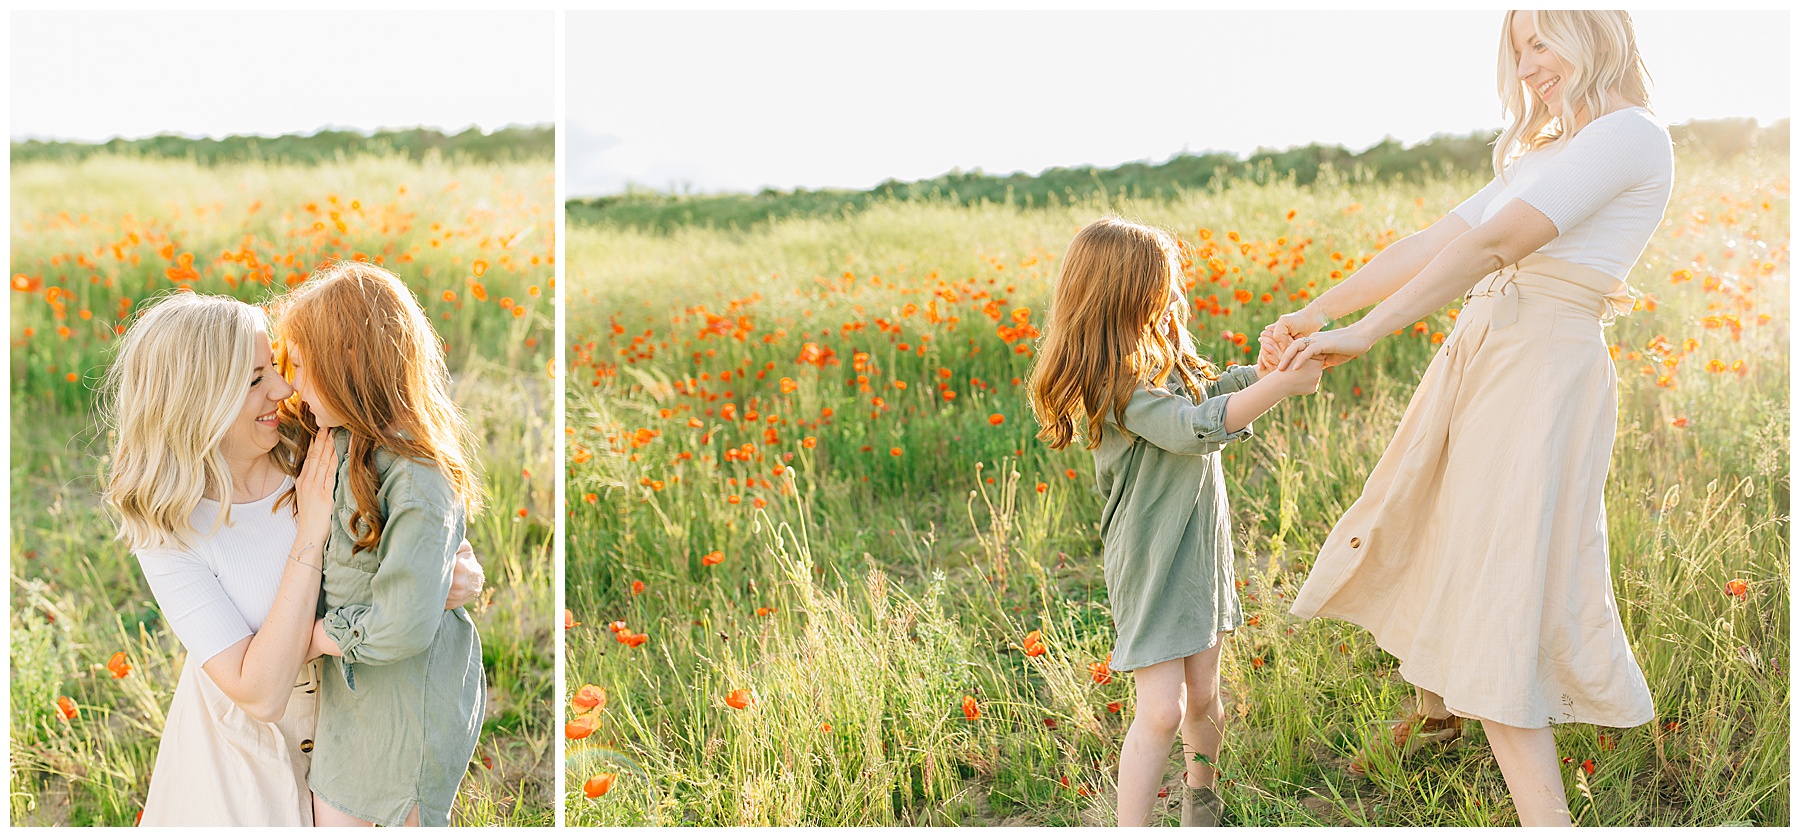 Riverton Poppy Pictures | The Walker